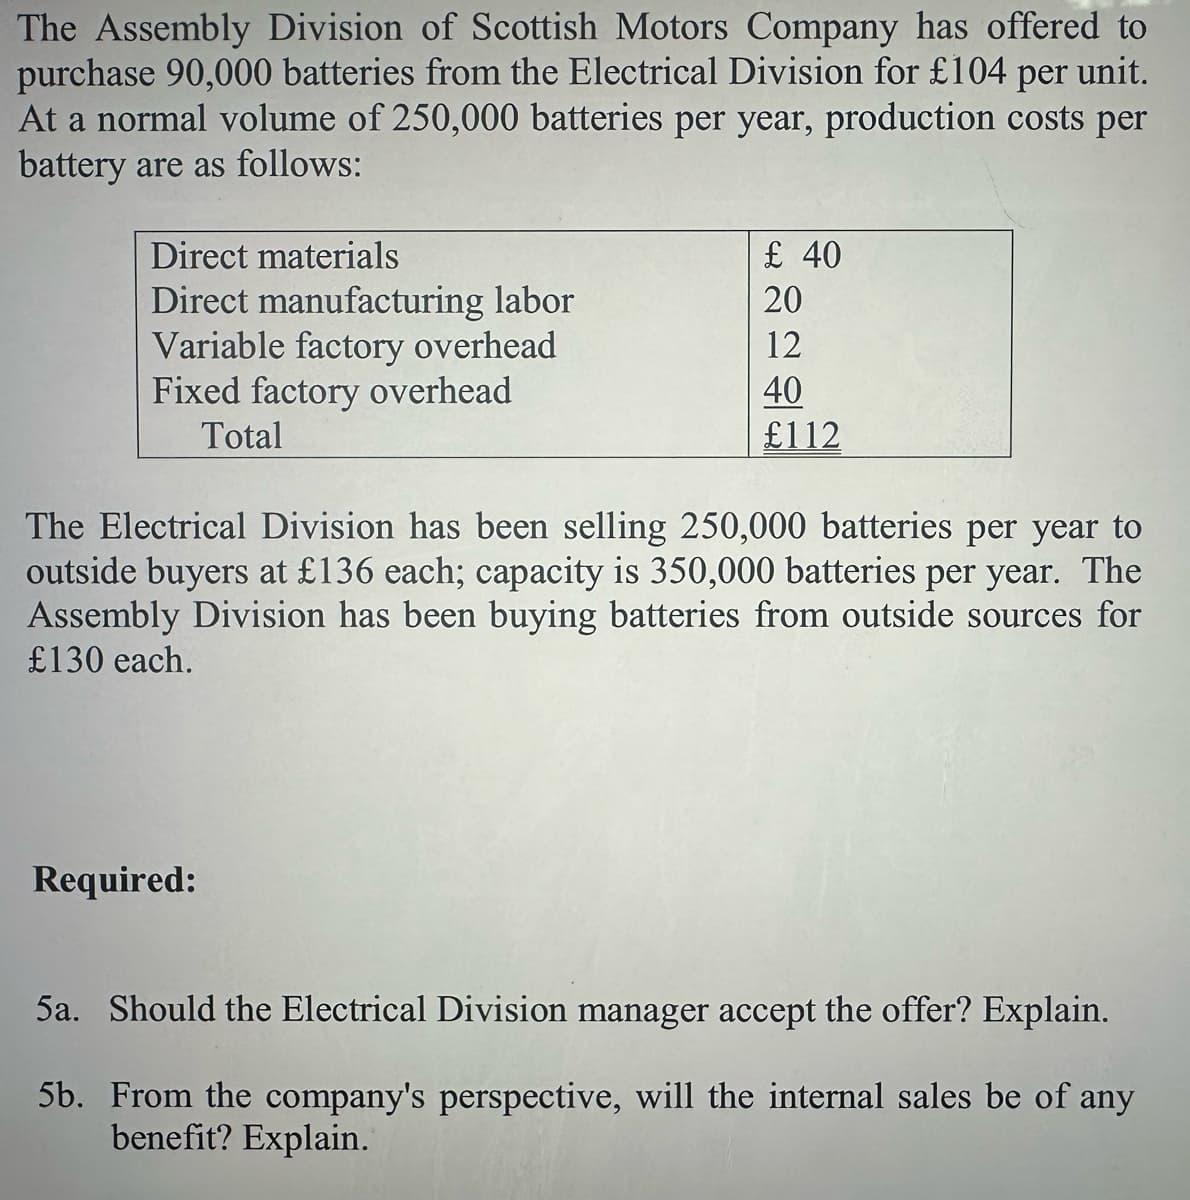 The Assembly Division of Scottish Motors Company has offered to
purchase 90,000 batteries from the Electrical Division for £104 per unit.
At a normal volume of 250,000 batteries per year, production costs per
battery are as follows:
Direct materials
Direct manufacturing labor
Variable factory overhead
Fixed factory overhead
Total
£ 40
20
12
40
£112
The Electrical Division has been selling 250,000 batteries per year to
outside buyers at £136 each; capacity is 350,000 batteries per year. The
Assembly Division has been buying batteries from outside sources for
£130 each.
Required:
5a. Should the Electrical Division manager accept the offer? Explain.
5b. From the company's perspective, will the internal sales be of any
benefit? Explain.